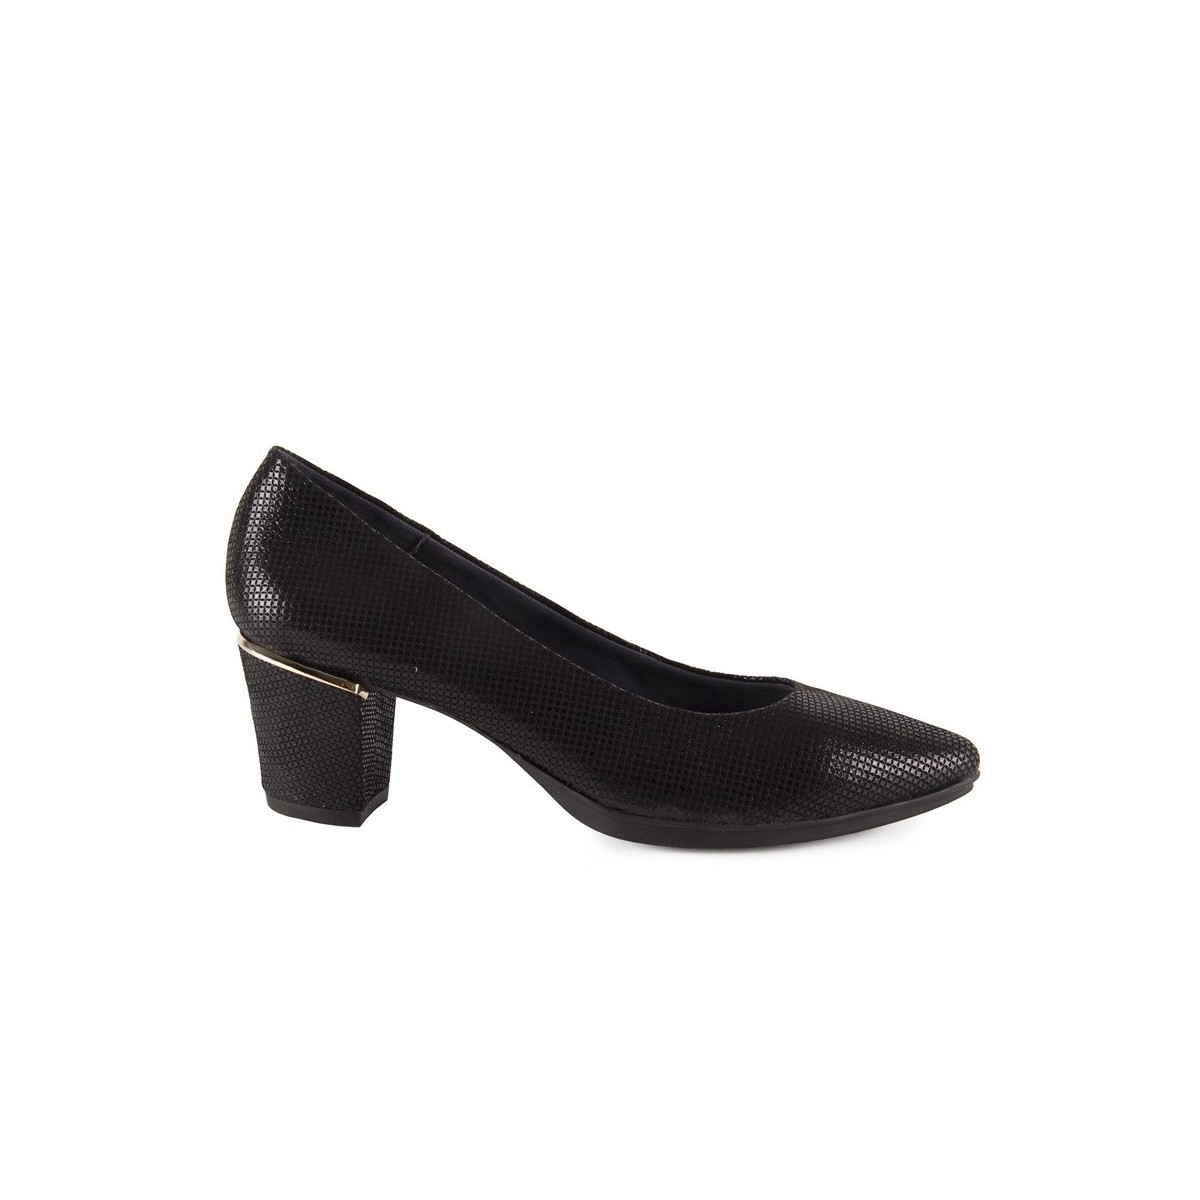 Black leather pumps by Chamby